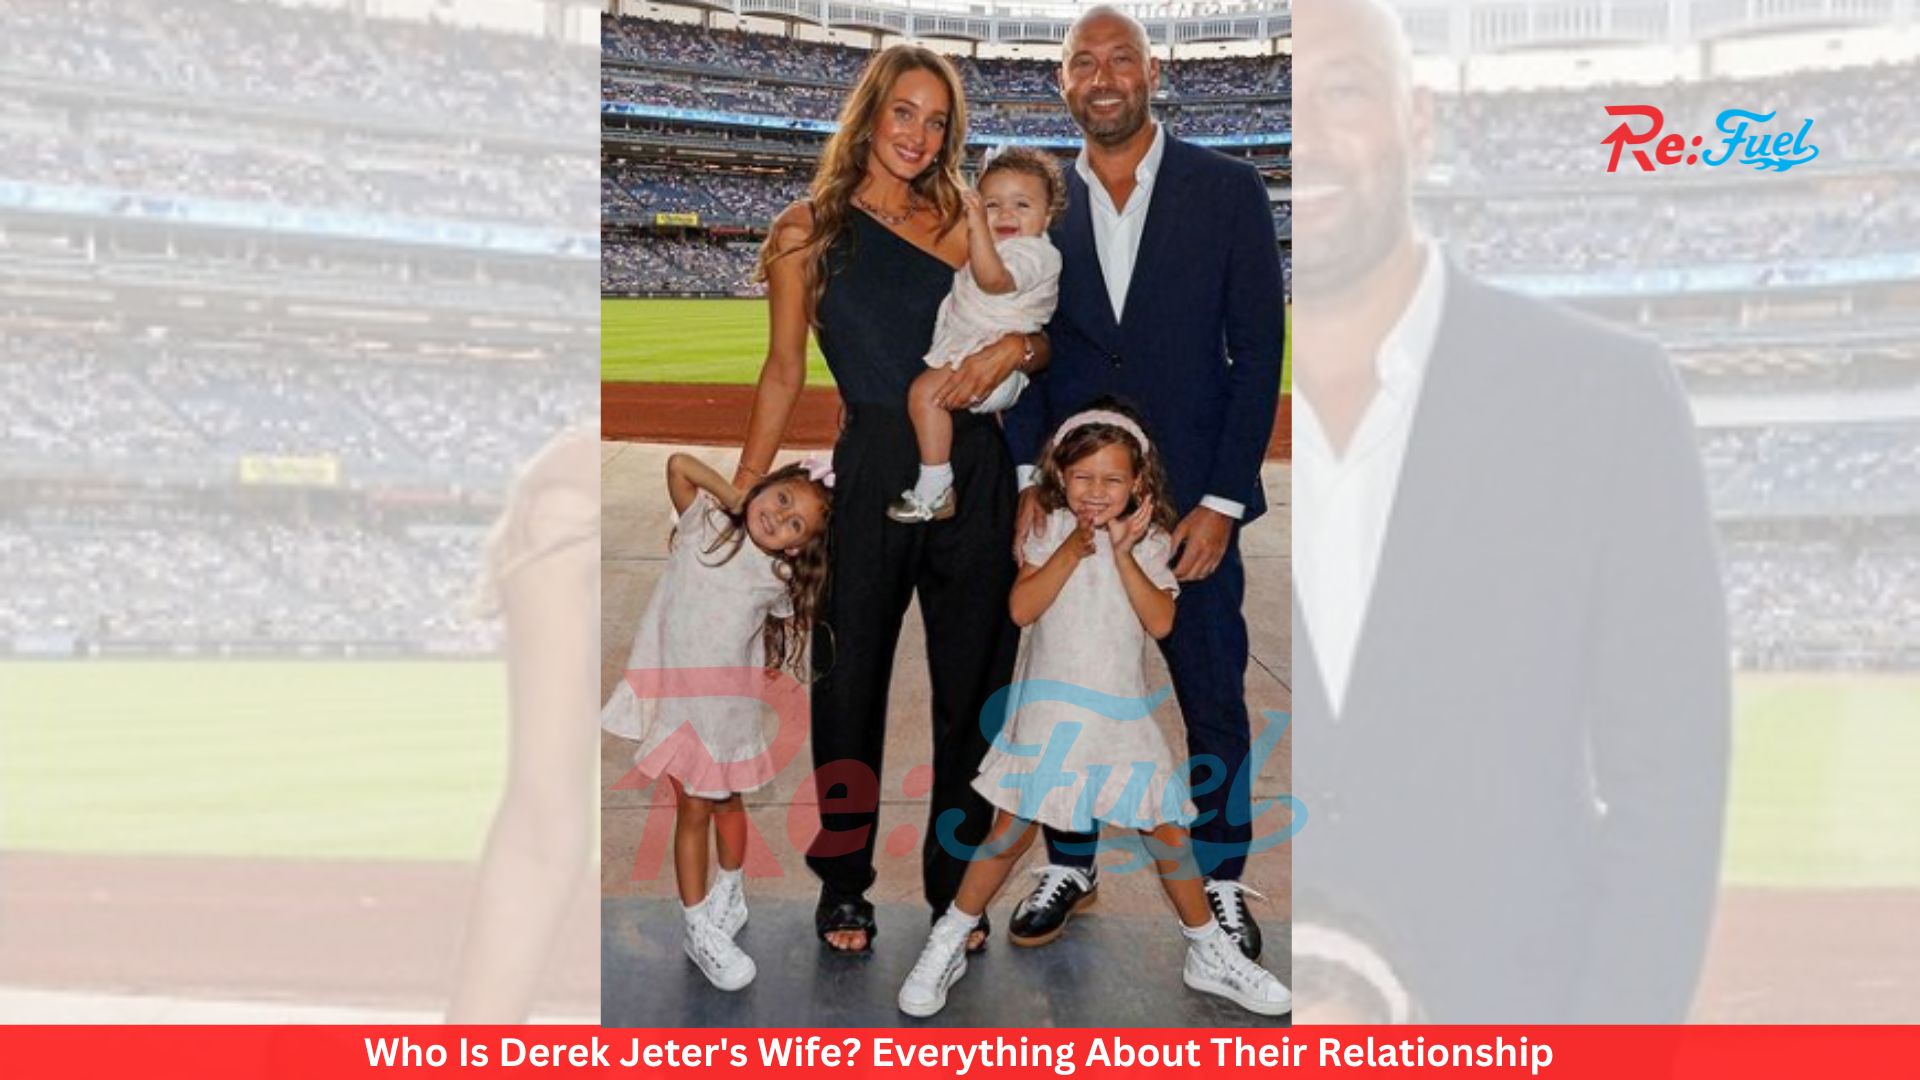 Who Is Derek Jeter's Wife? Everything About Their Relationship